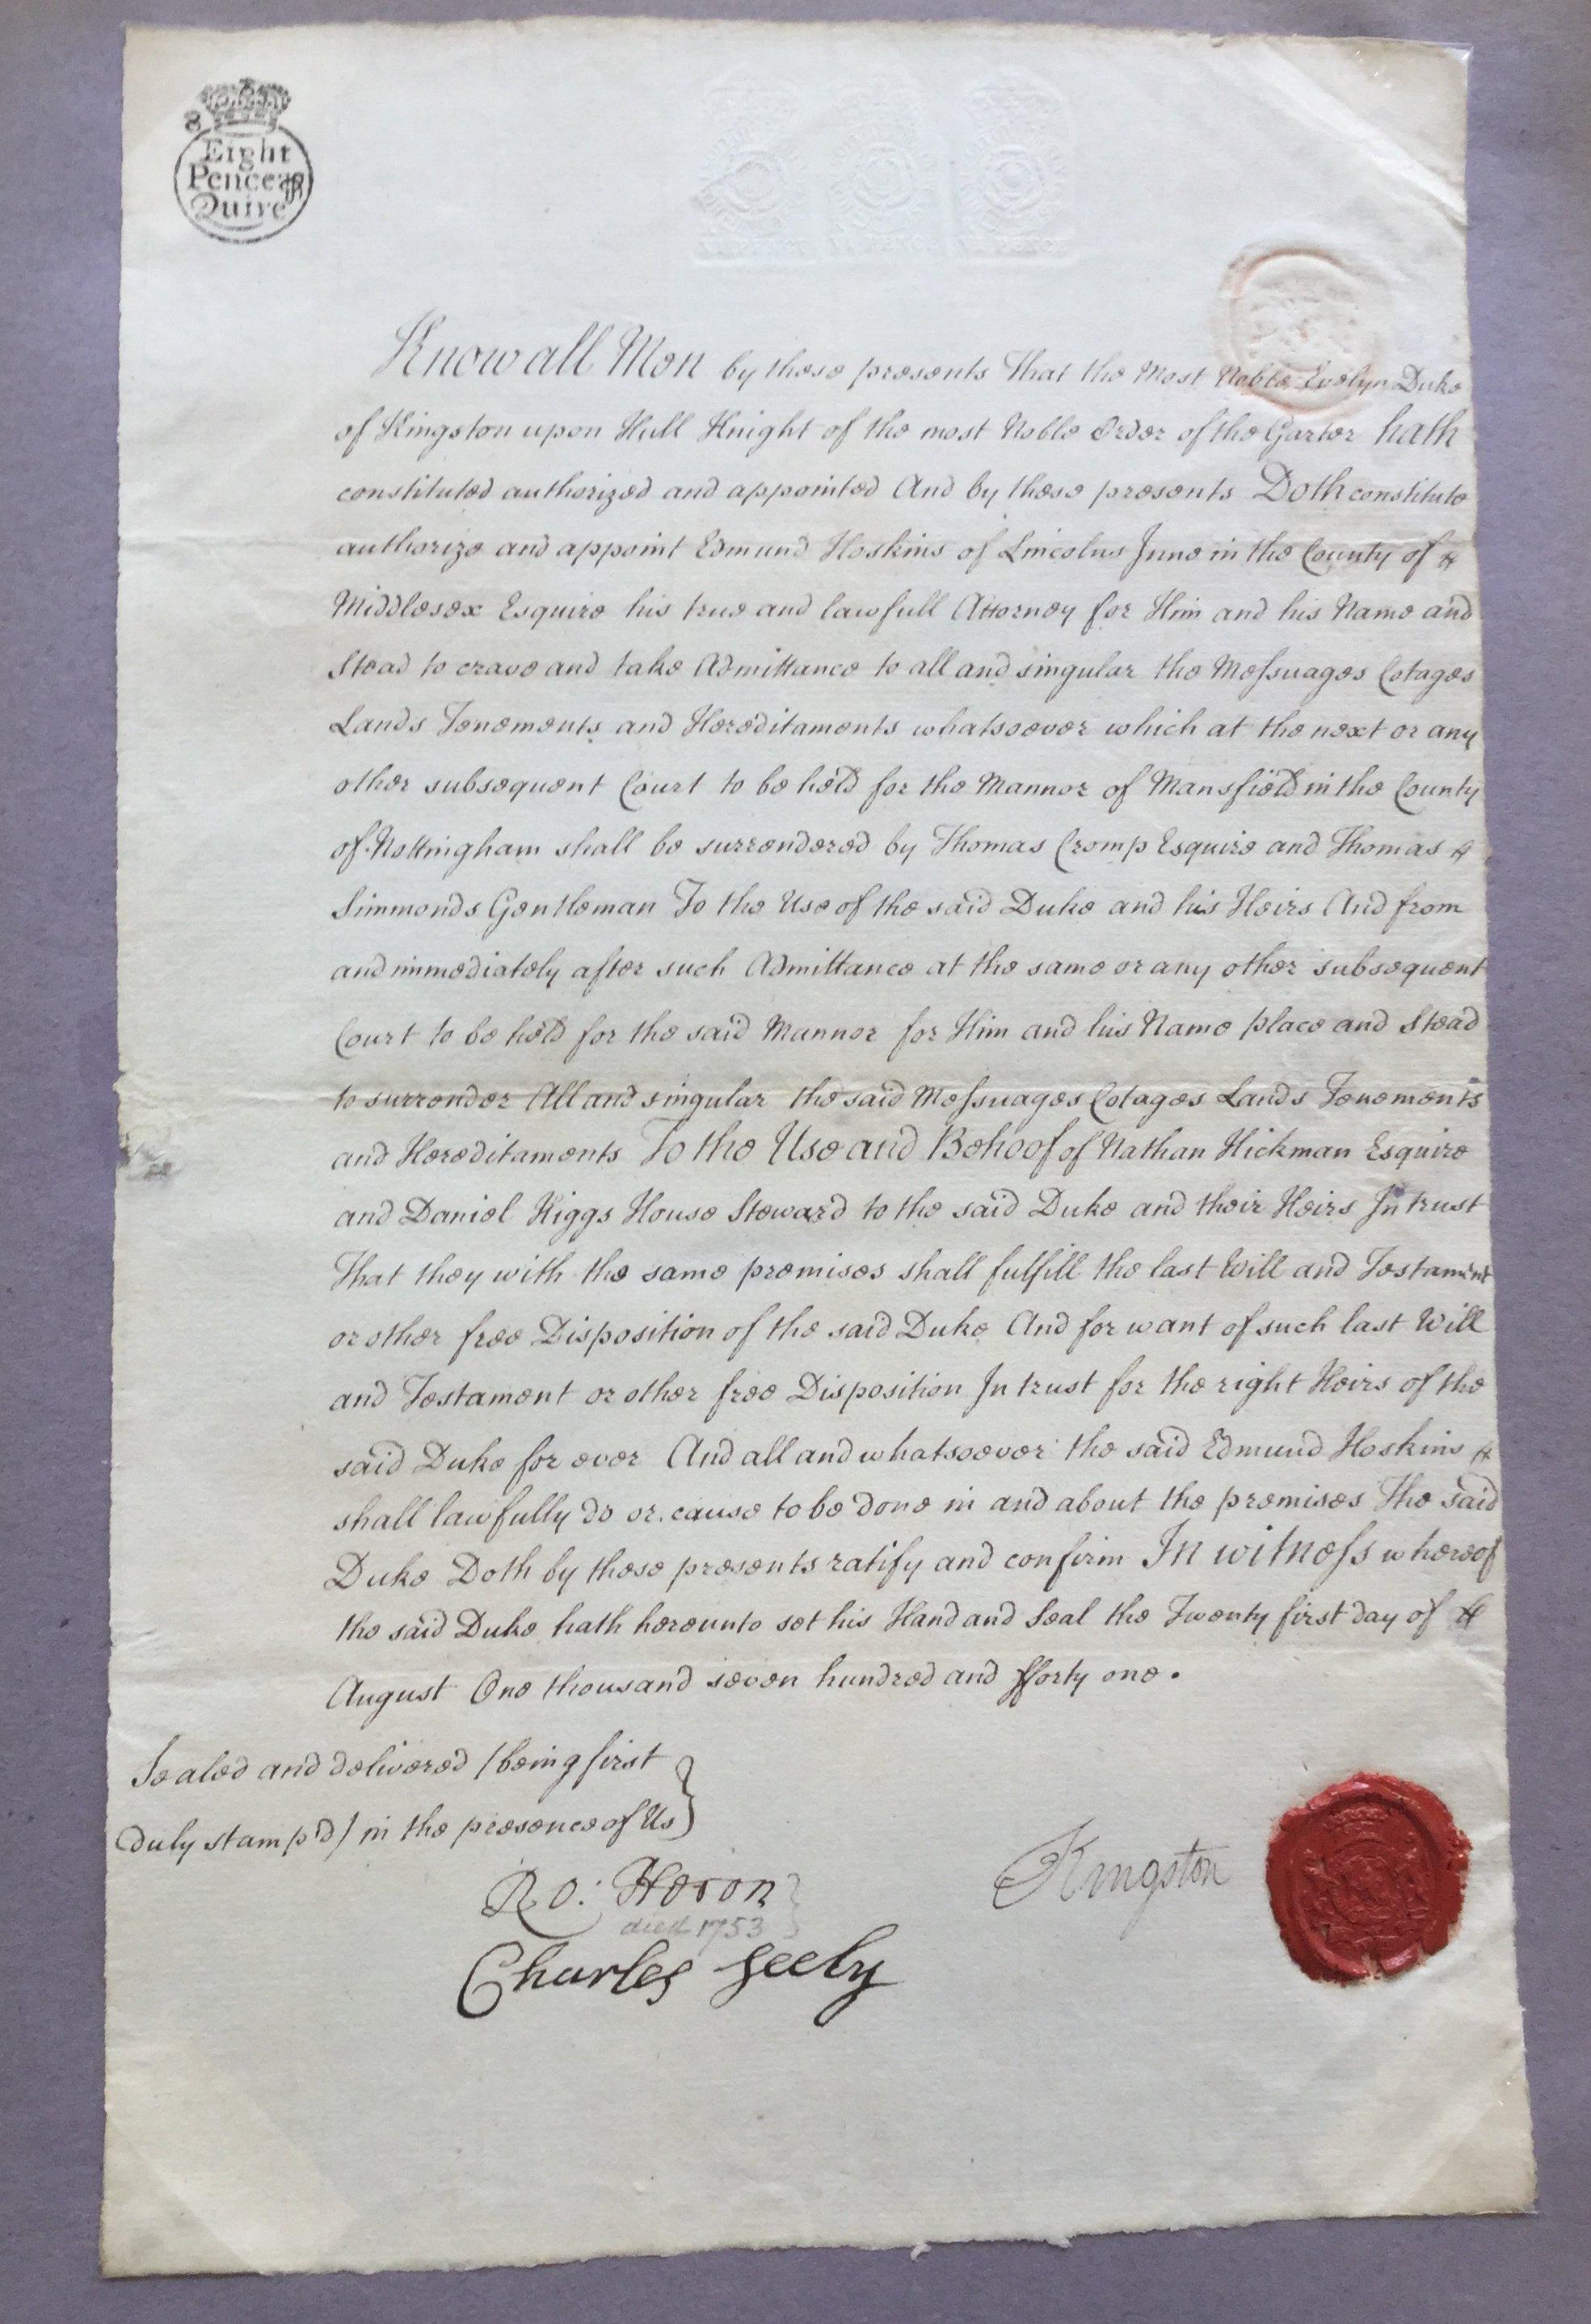 A fascinating collection of signatures and handwritten letters from 18th and 19th century British nobility 
Names include:

11th Duke of Norfolk
3rd Duke of Northumberland
5th Earl of Selkirk
Marquess of Granby
1st Duke of Roxburgh
Duke of